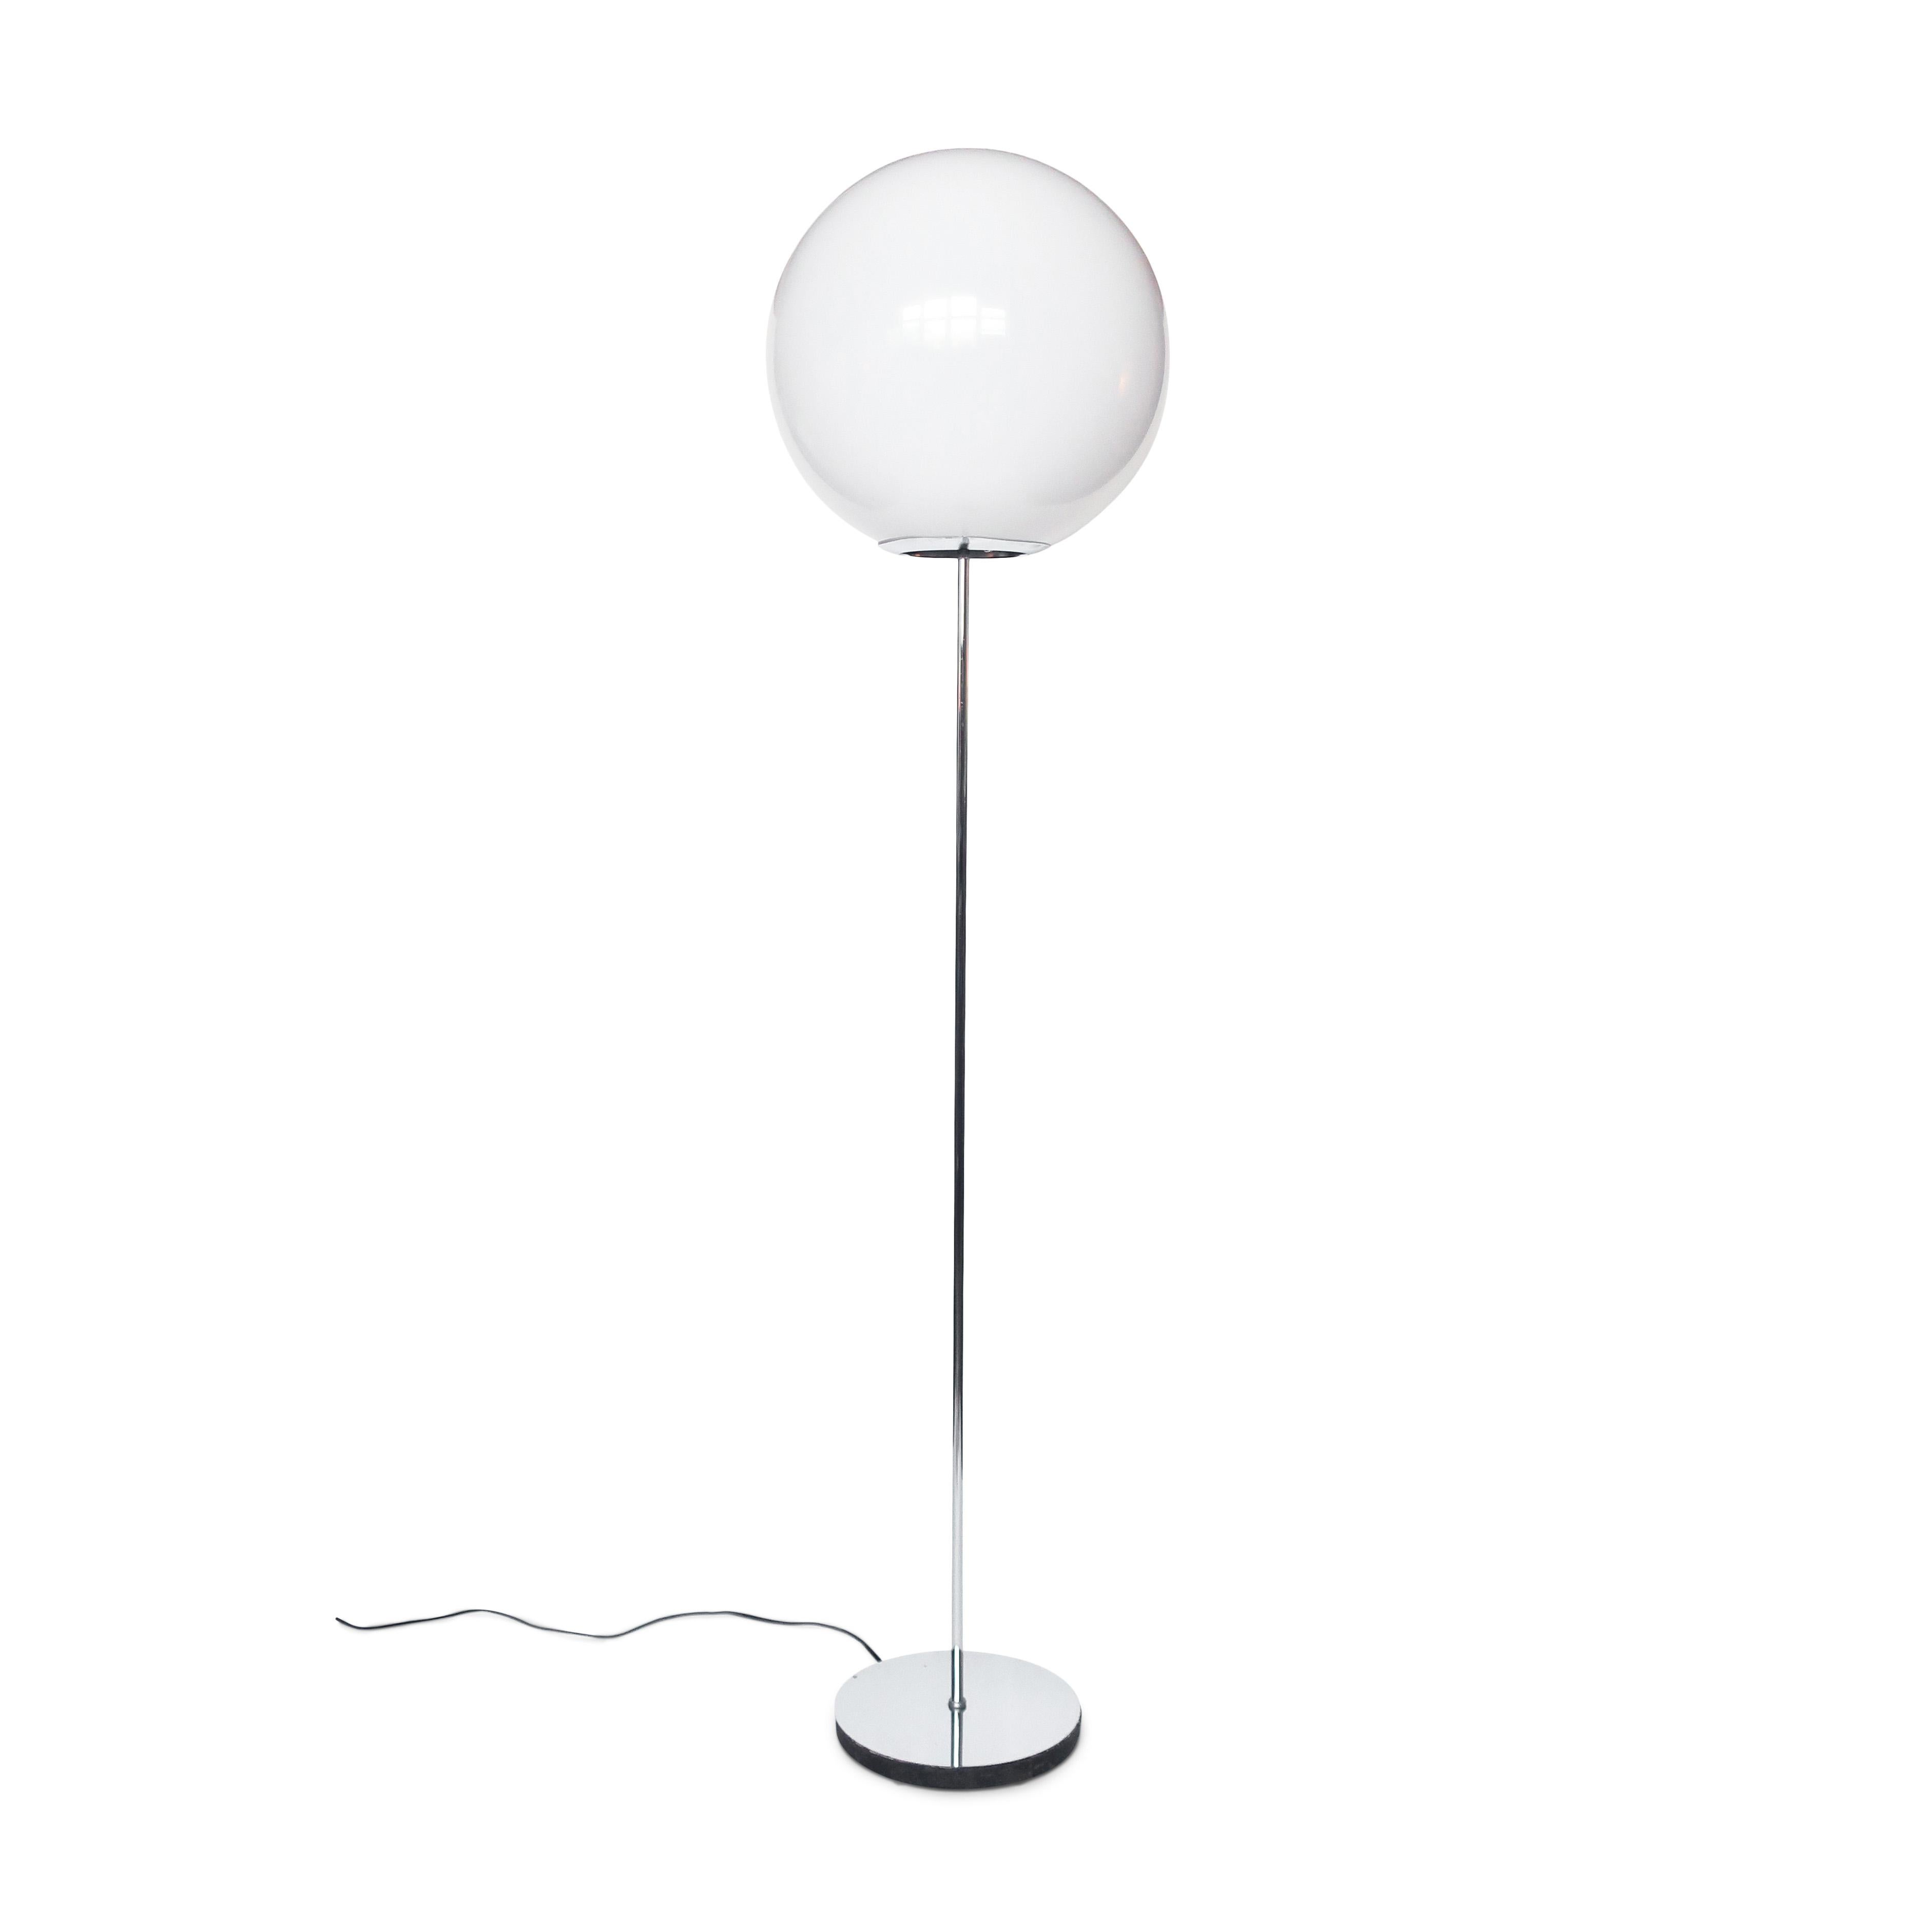 A beautiful mid-century modern floor lamp with white plastic globe shade in the style of Robert Sonneman and Neal Small.   Includes a spherical light-diffusing plastic shade (much safer than a glass shade!), a round weighted chrome base, and slender